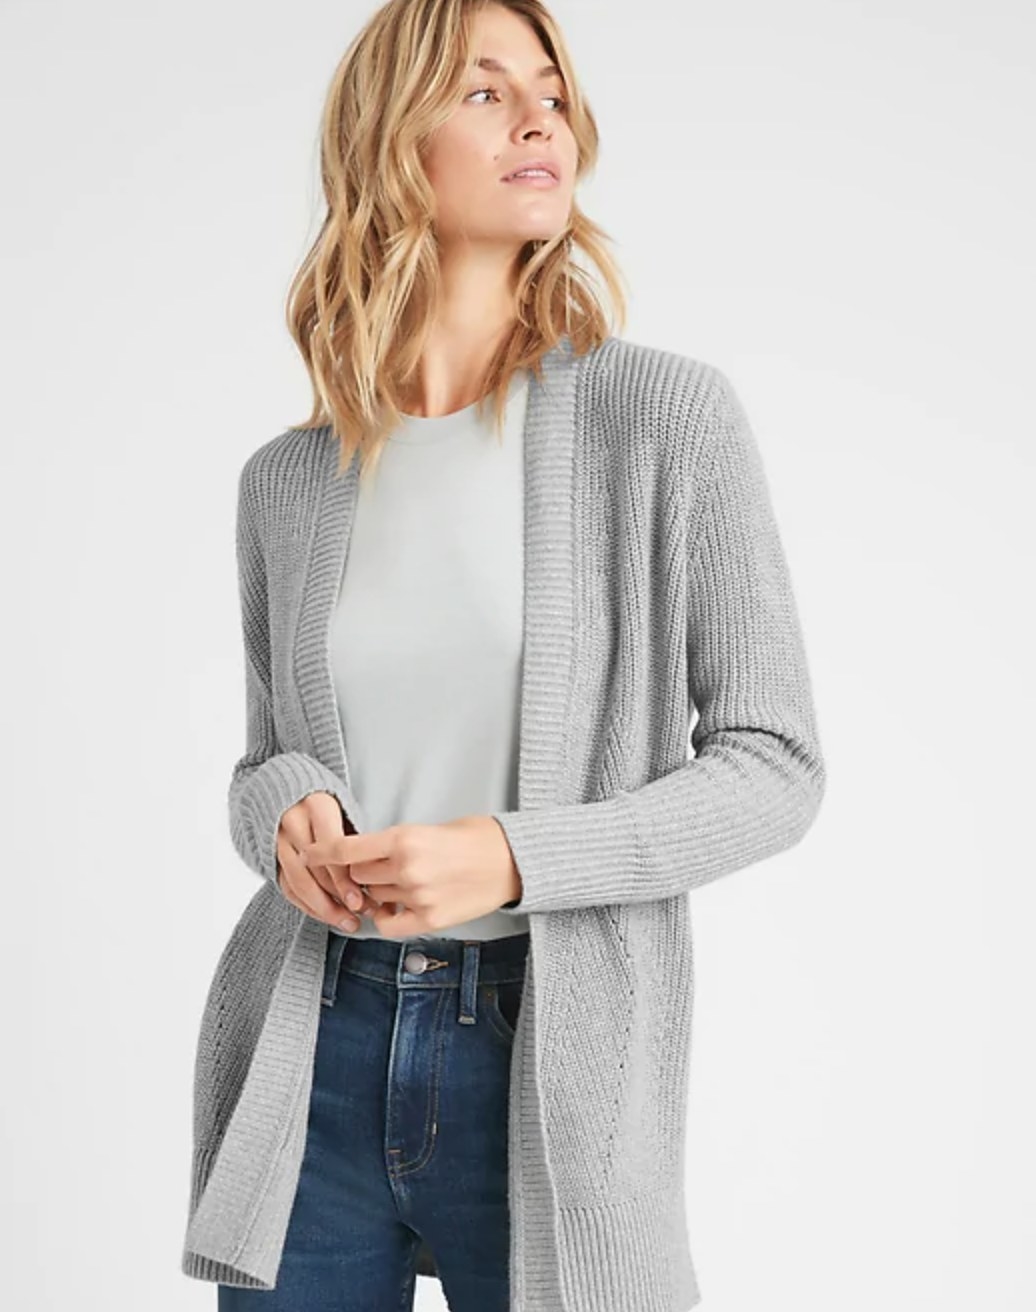 The cable-knit cardigan in grey